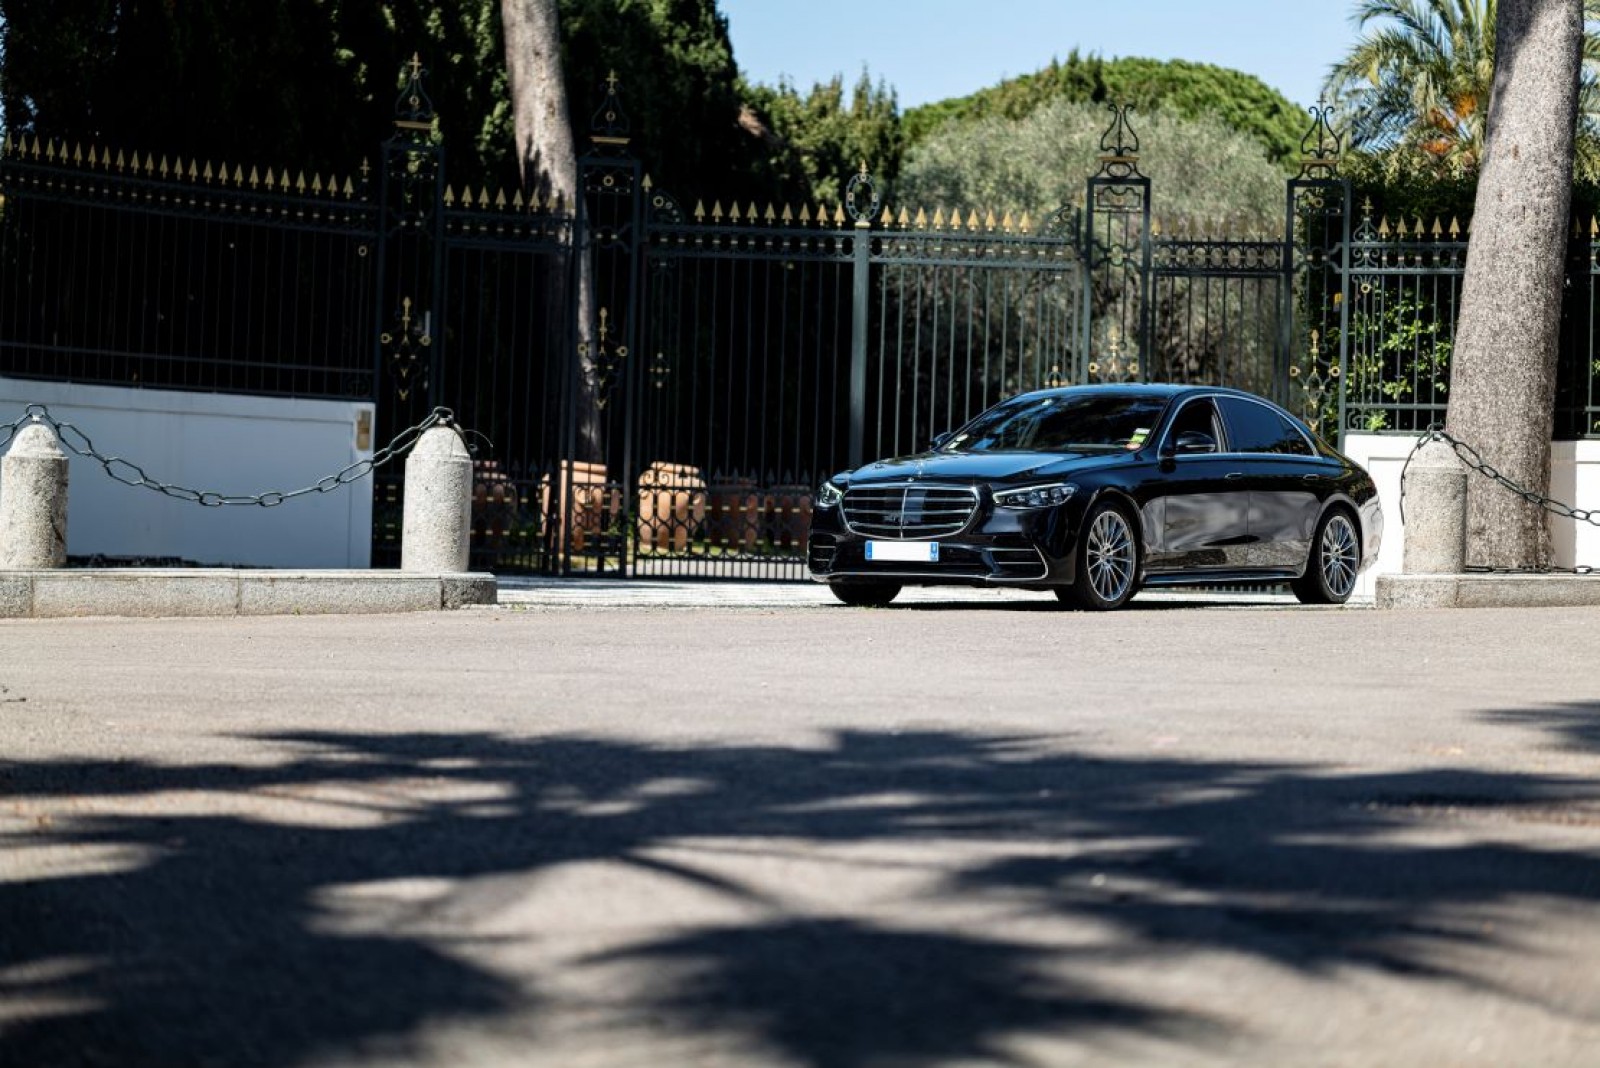 Limo Service with Private Driver in Saint Tropez - 24/7 Service -  VIP Limousine Service - Book Online - Tailor-Made Quote 